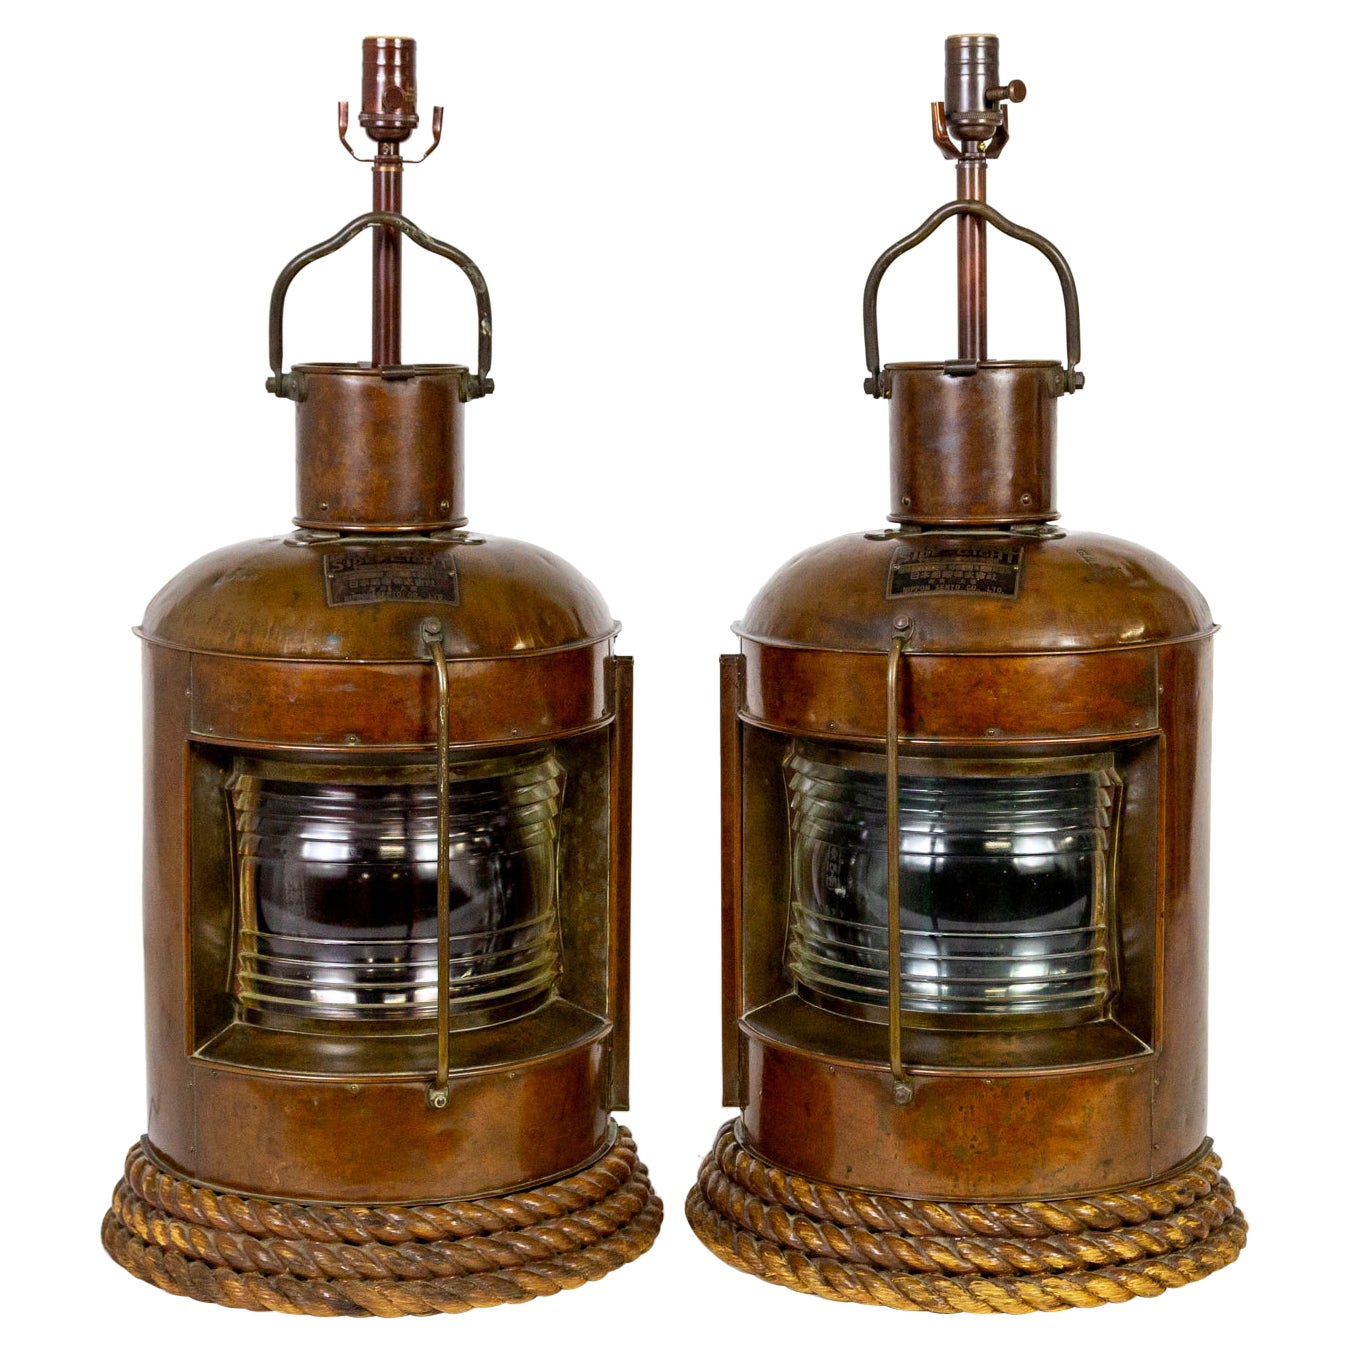 Large Antique Copper Ship Lanterns as Corner Table Lamps w/ Rope Base, Pair For Sale